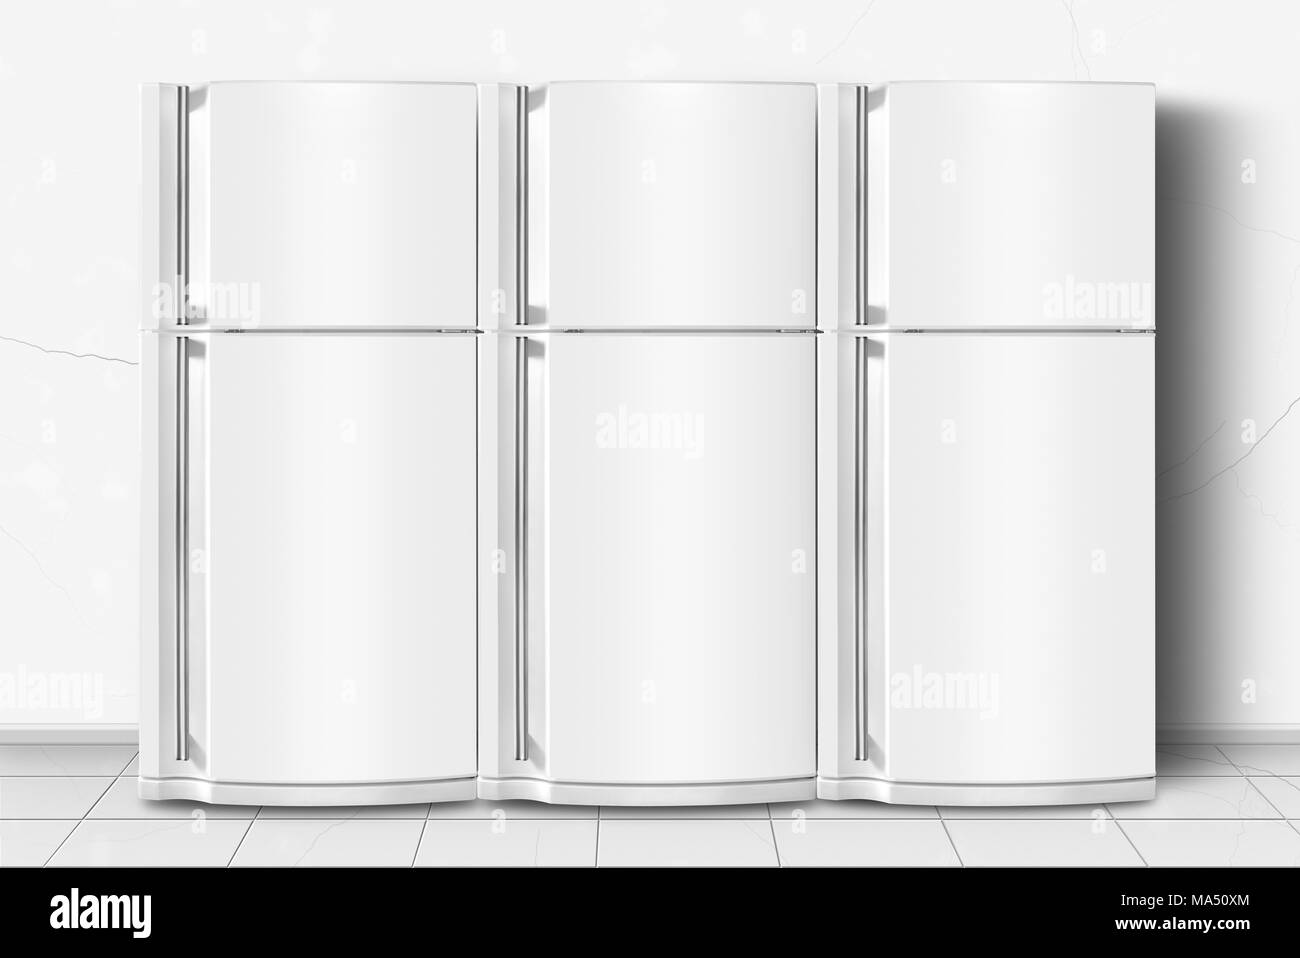 Major appliance - Three refrigerator in front on a white wall background Stock Photo